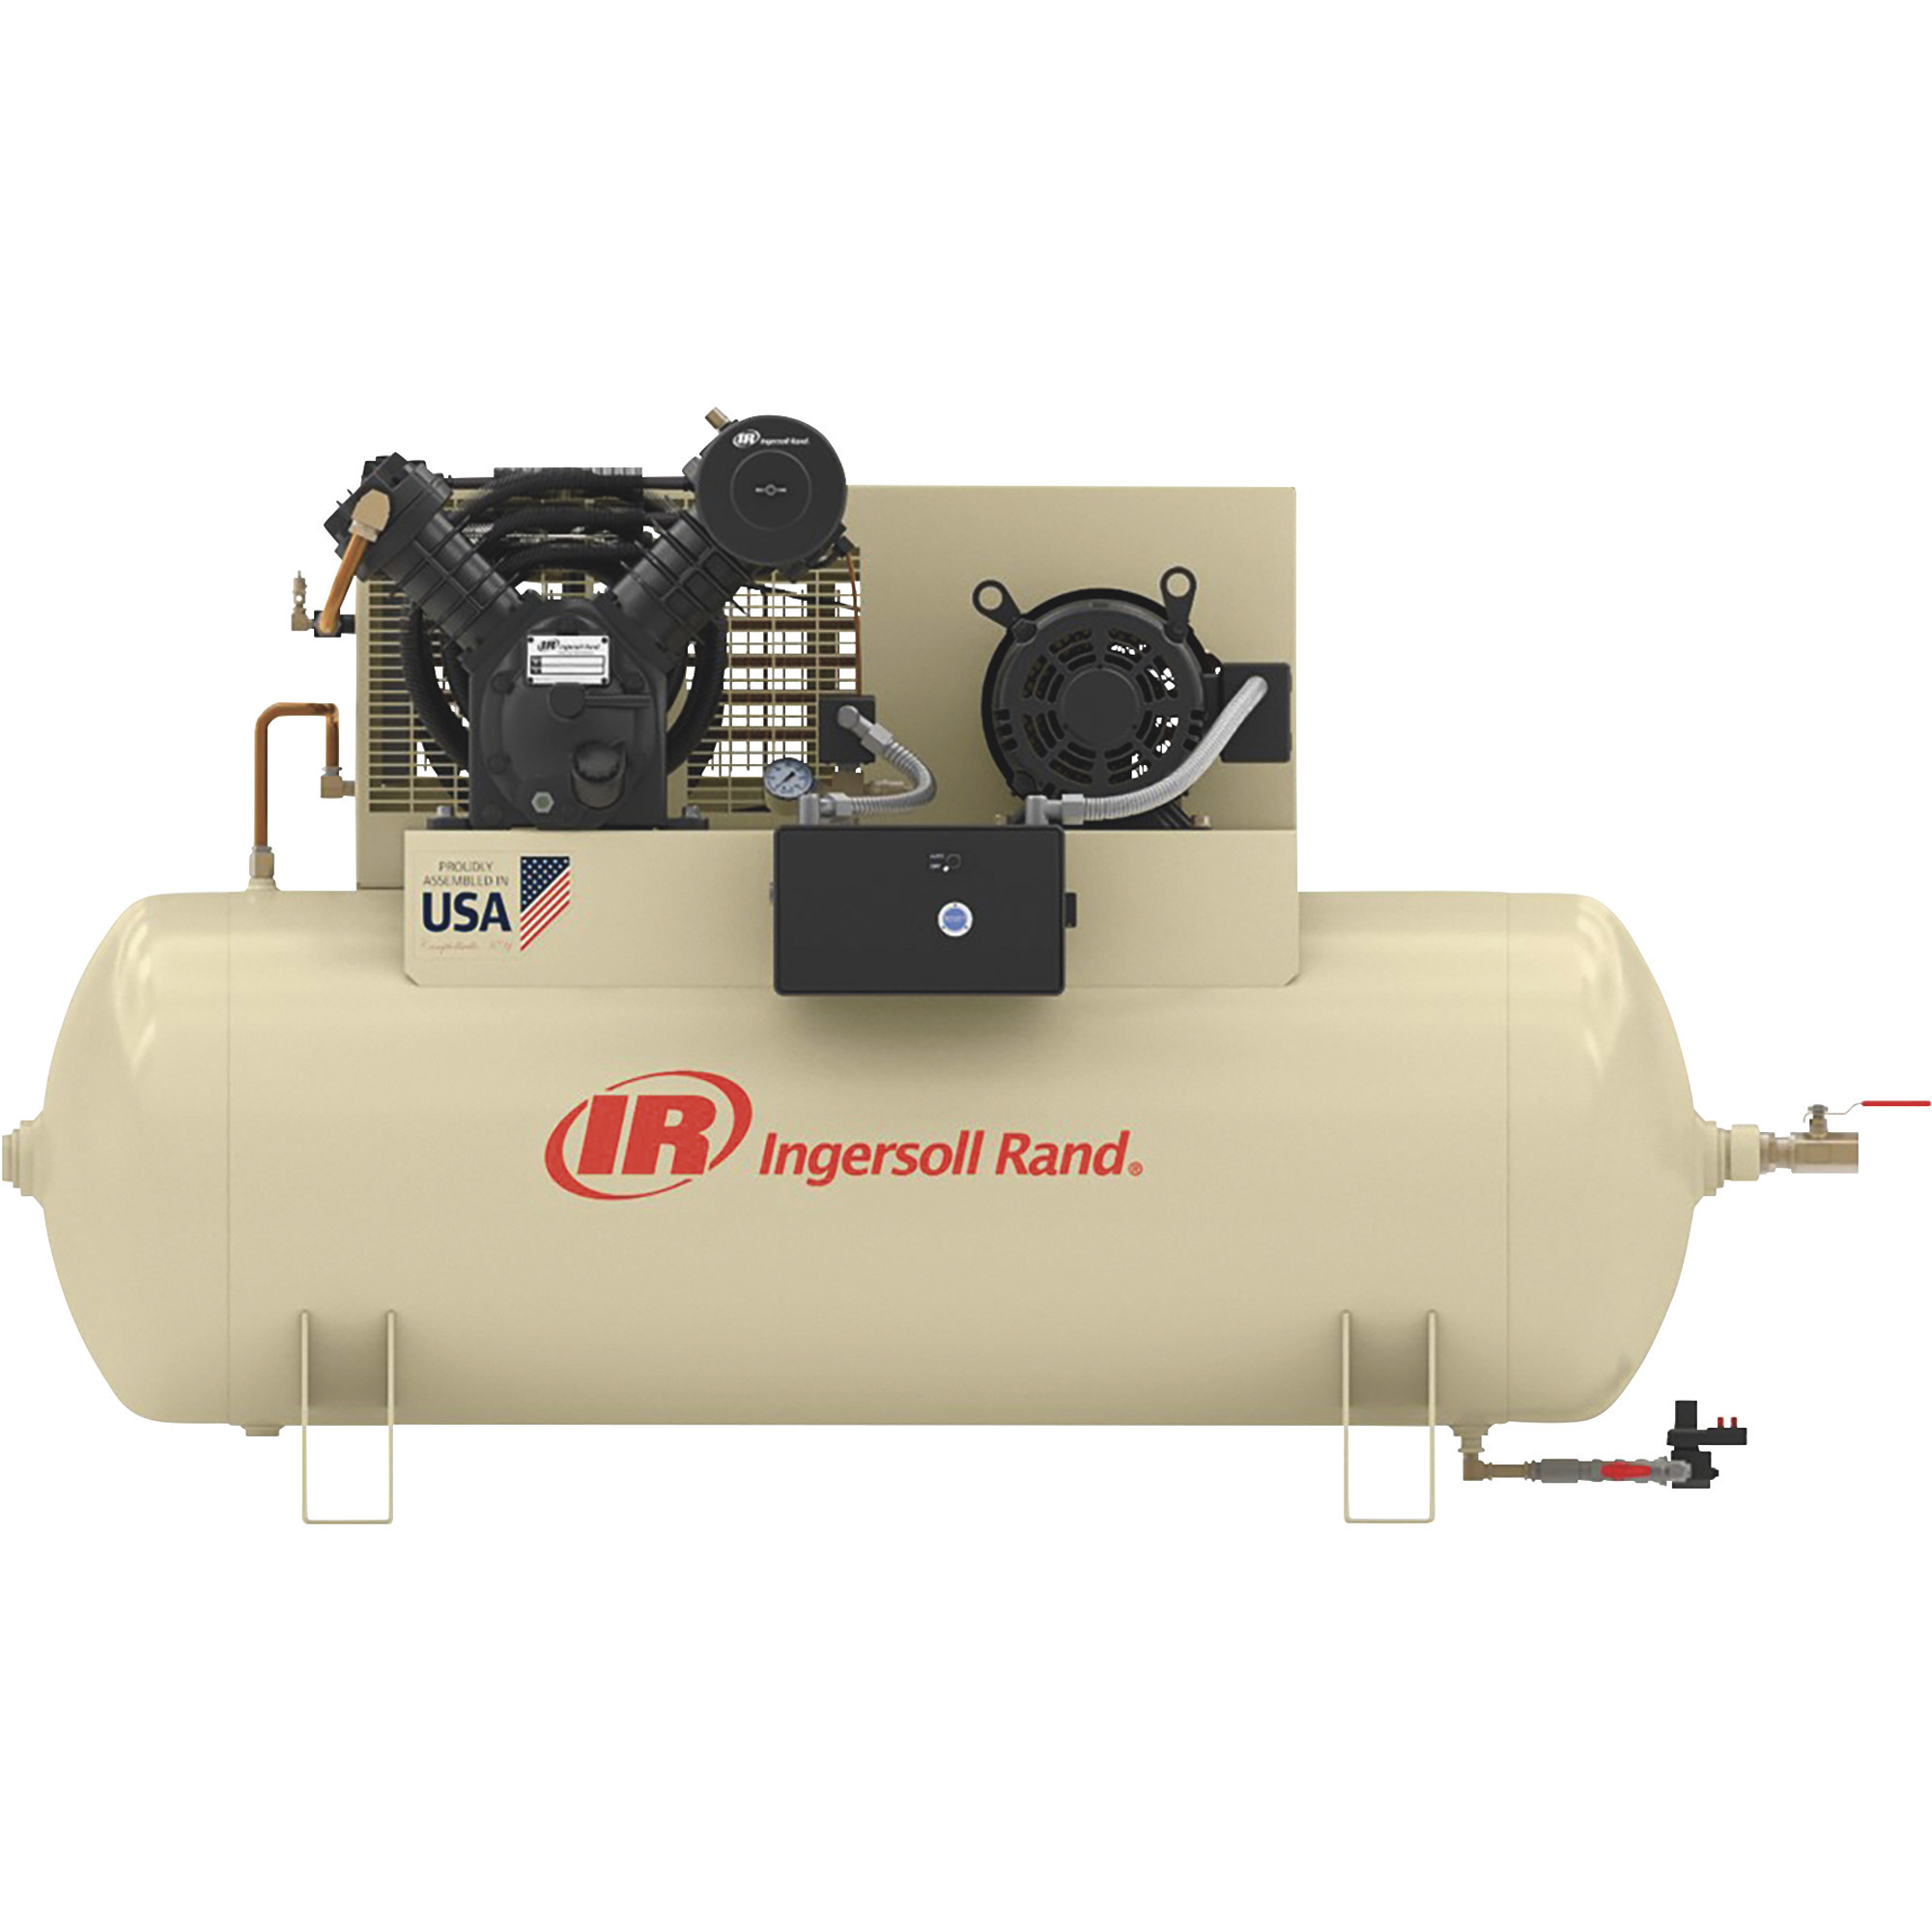 Ingersoll Rand Type-30 Reciprocating Air Compressor (Dual Stage, Value Package Plus), 10 HP, 230 Volt, 3 Phase, 120 Gallon Horizontal, Model 2545E10-